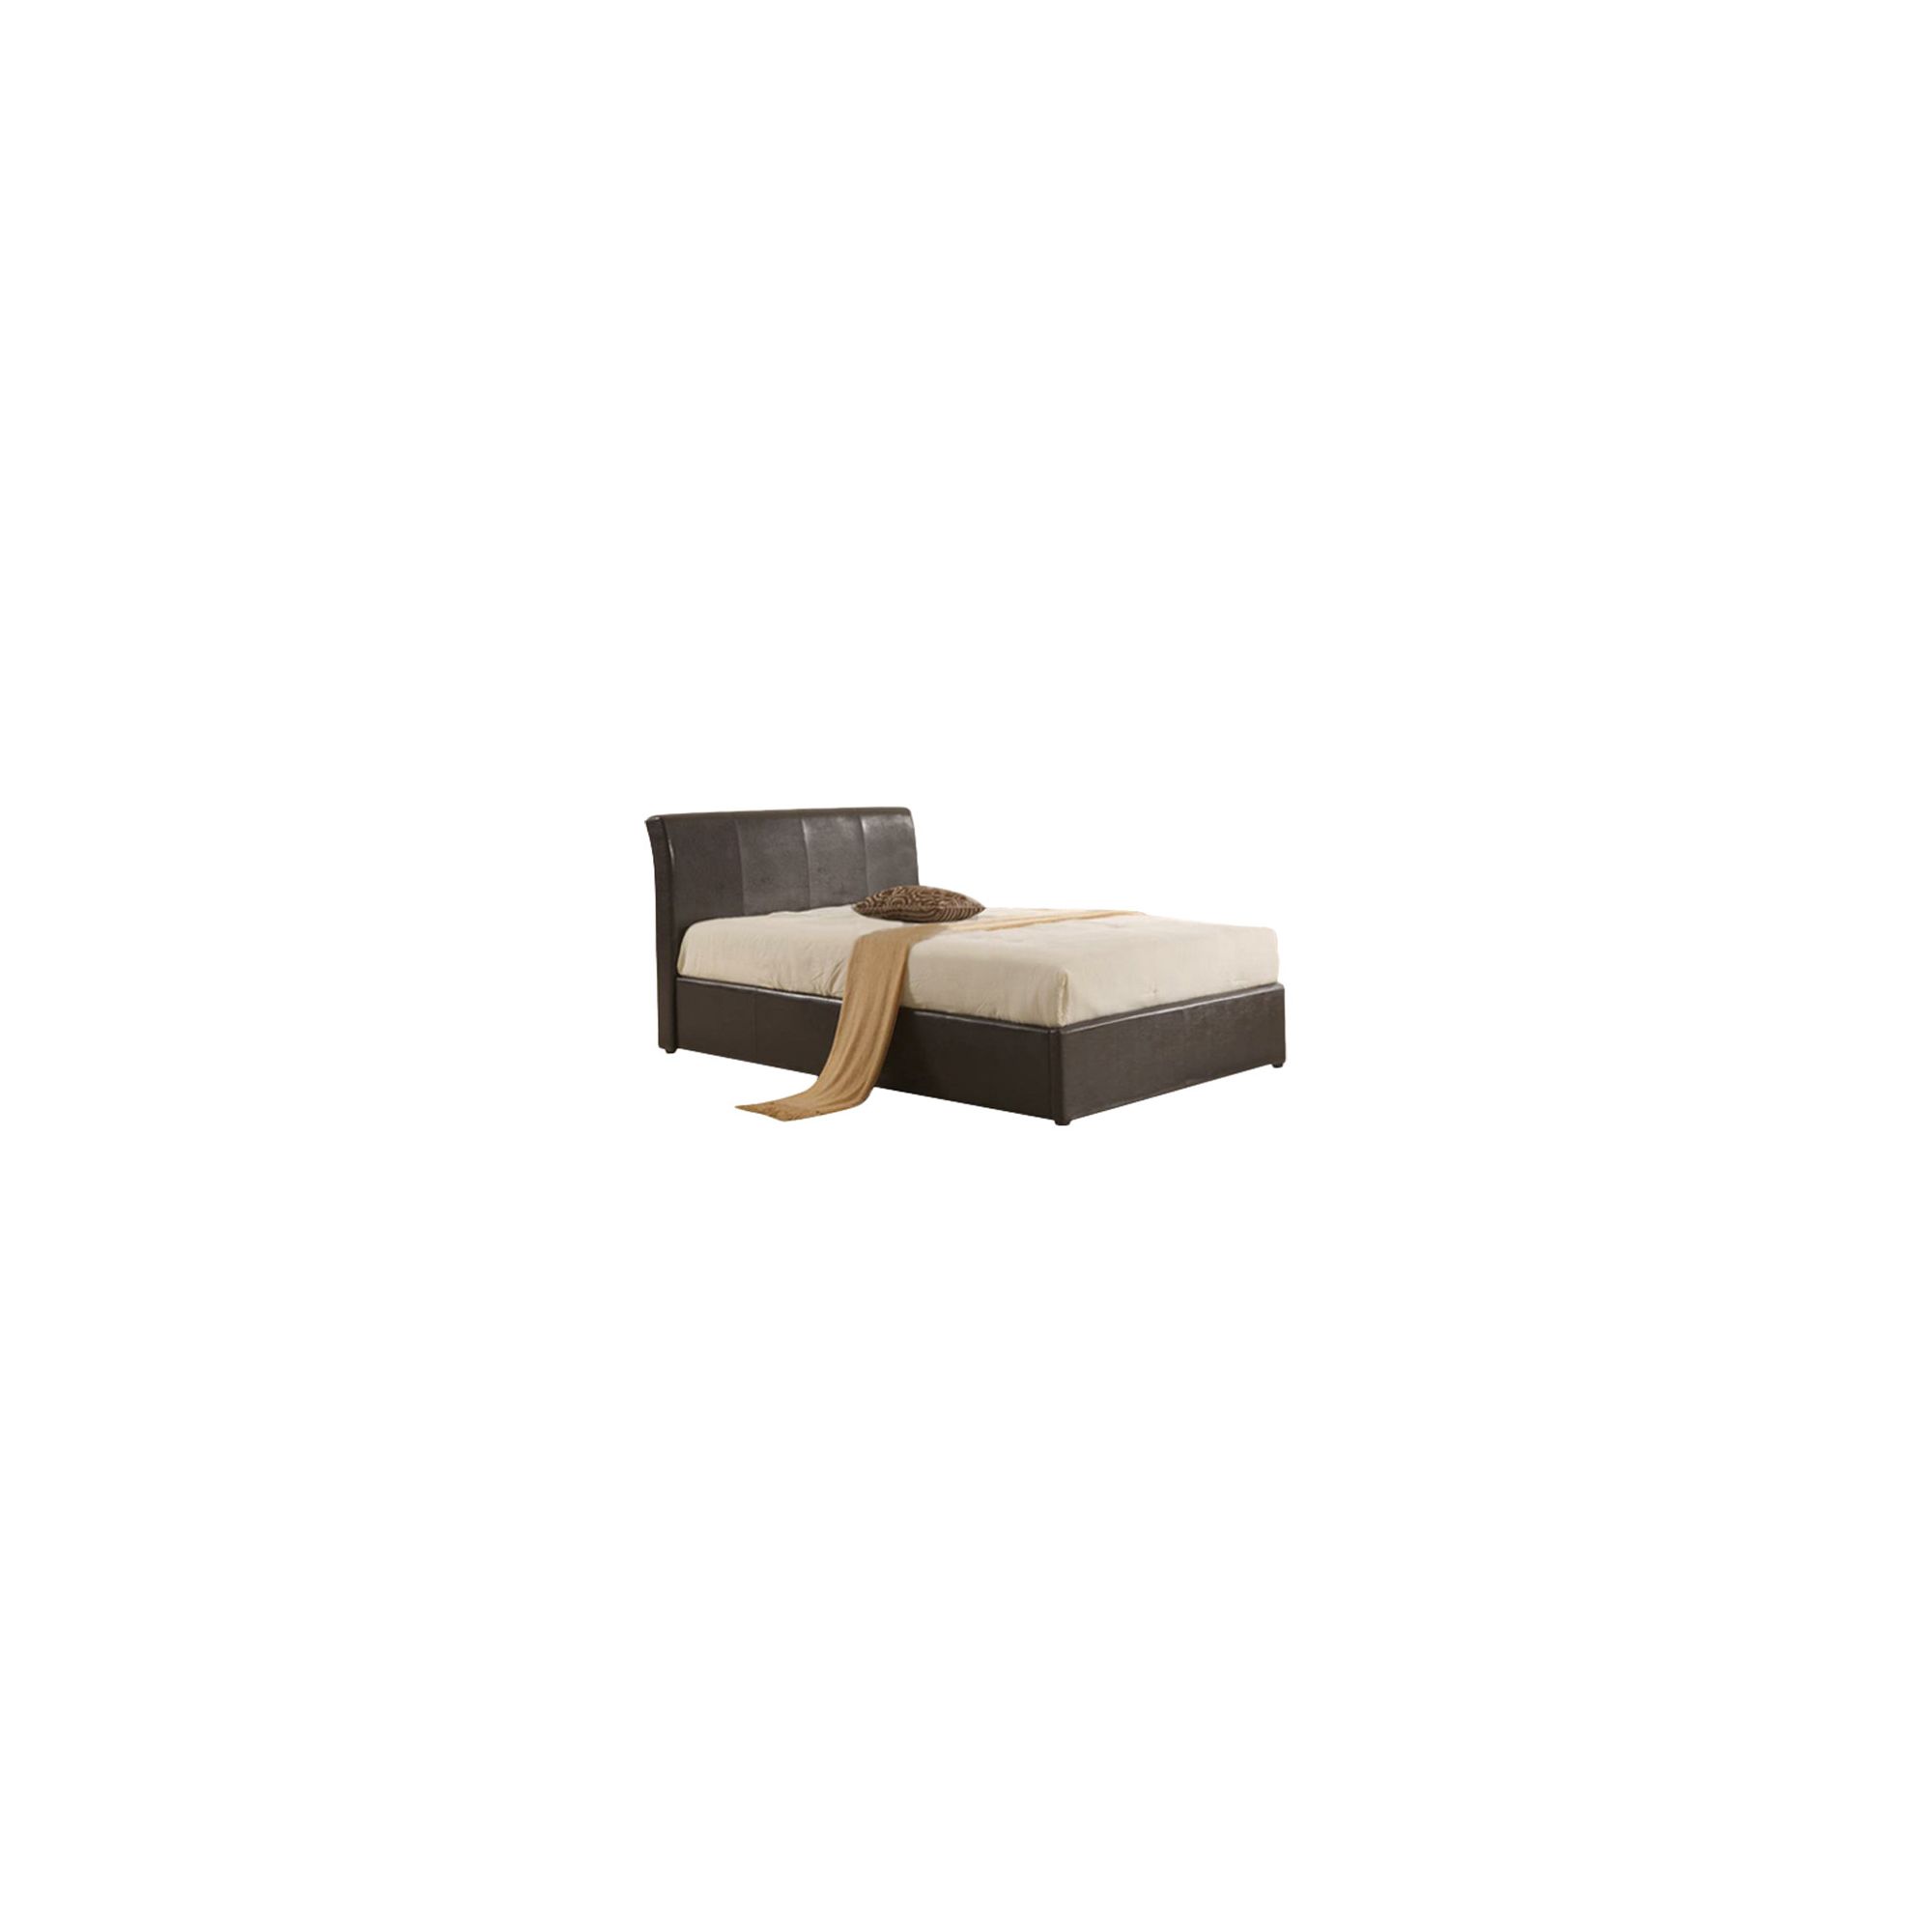 MetalBedsLtd Texas New Ottoman Bed - Black - Small Double at Tesco Direct